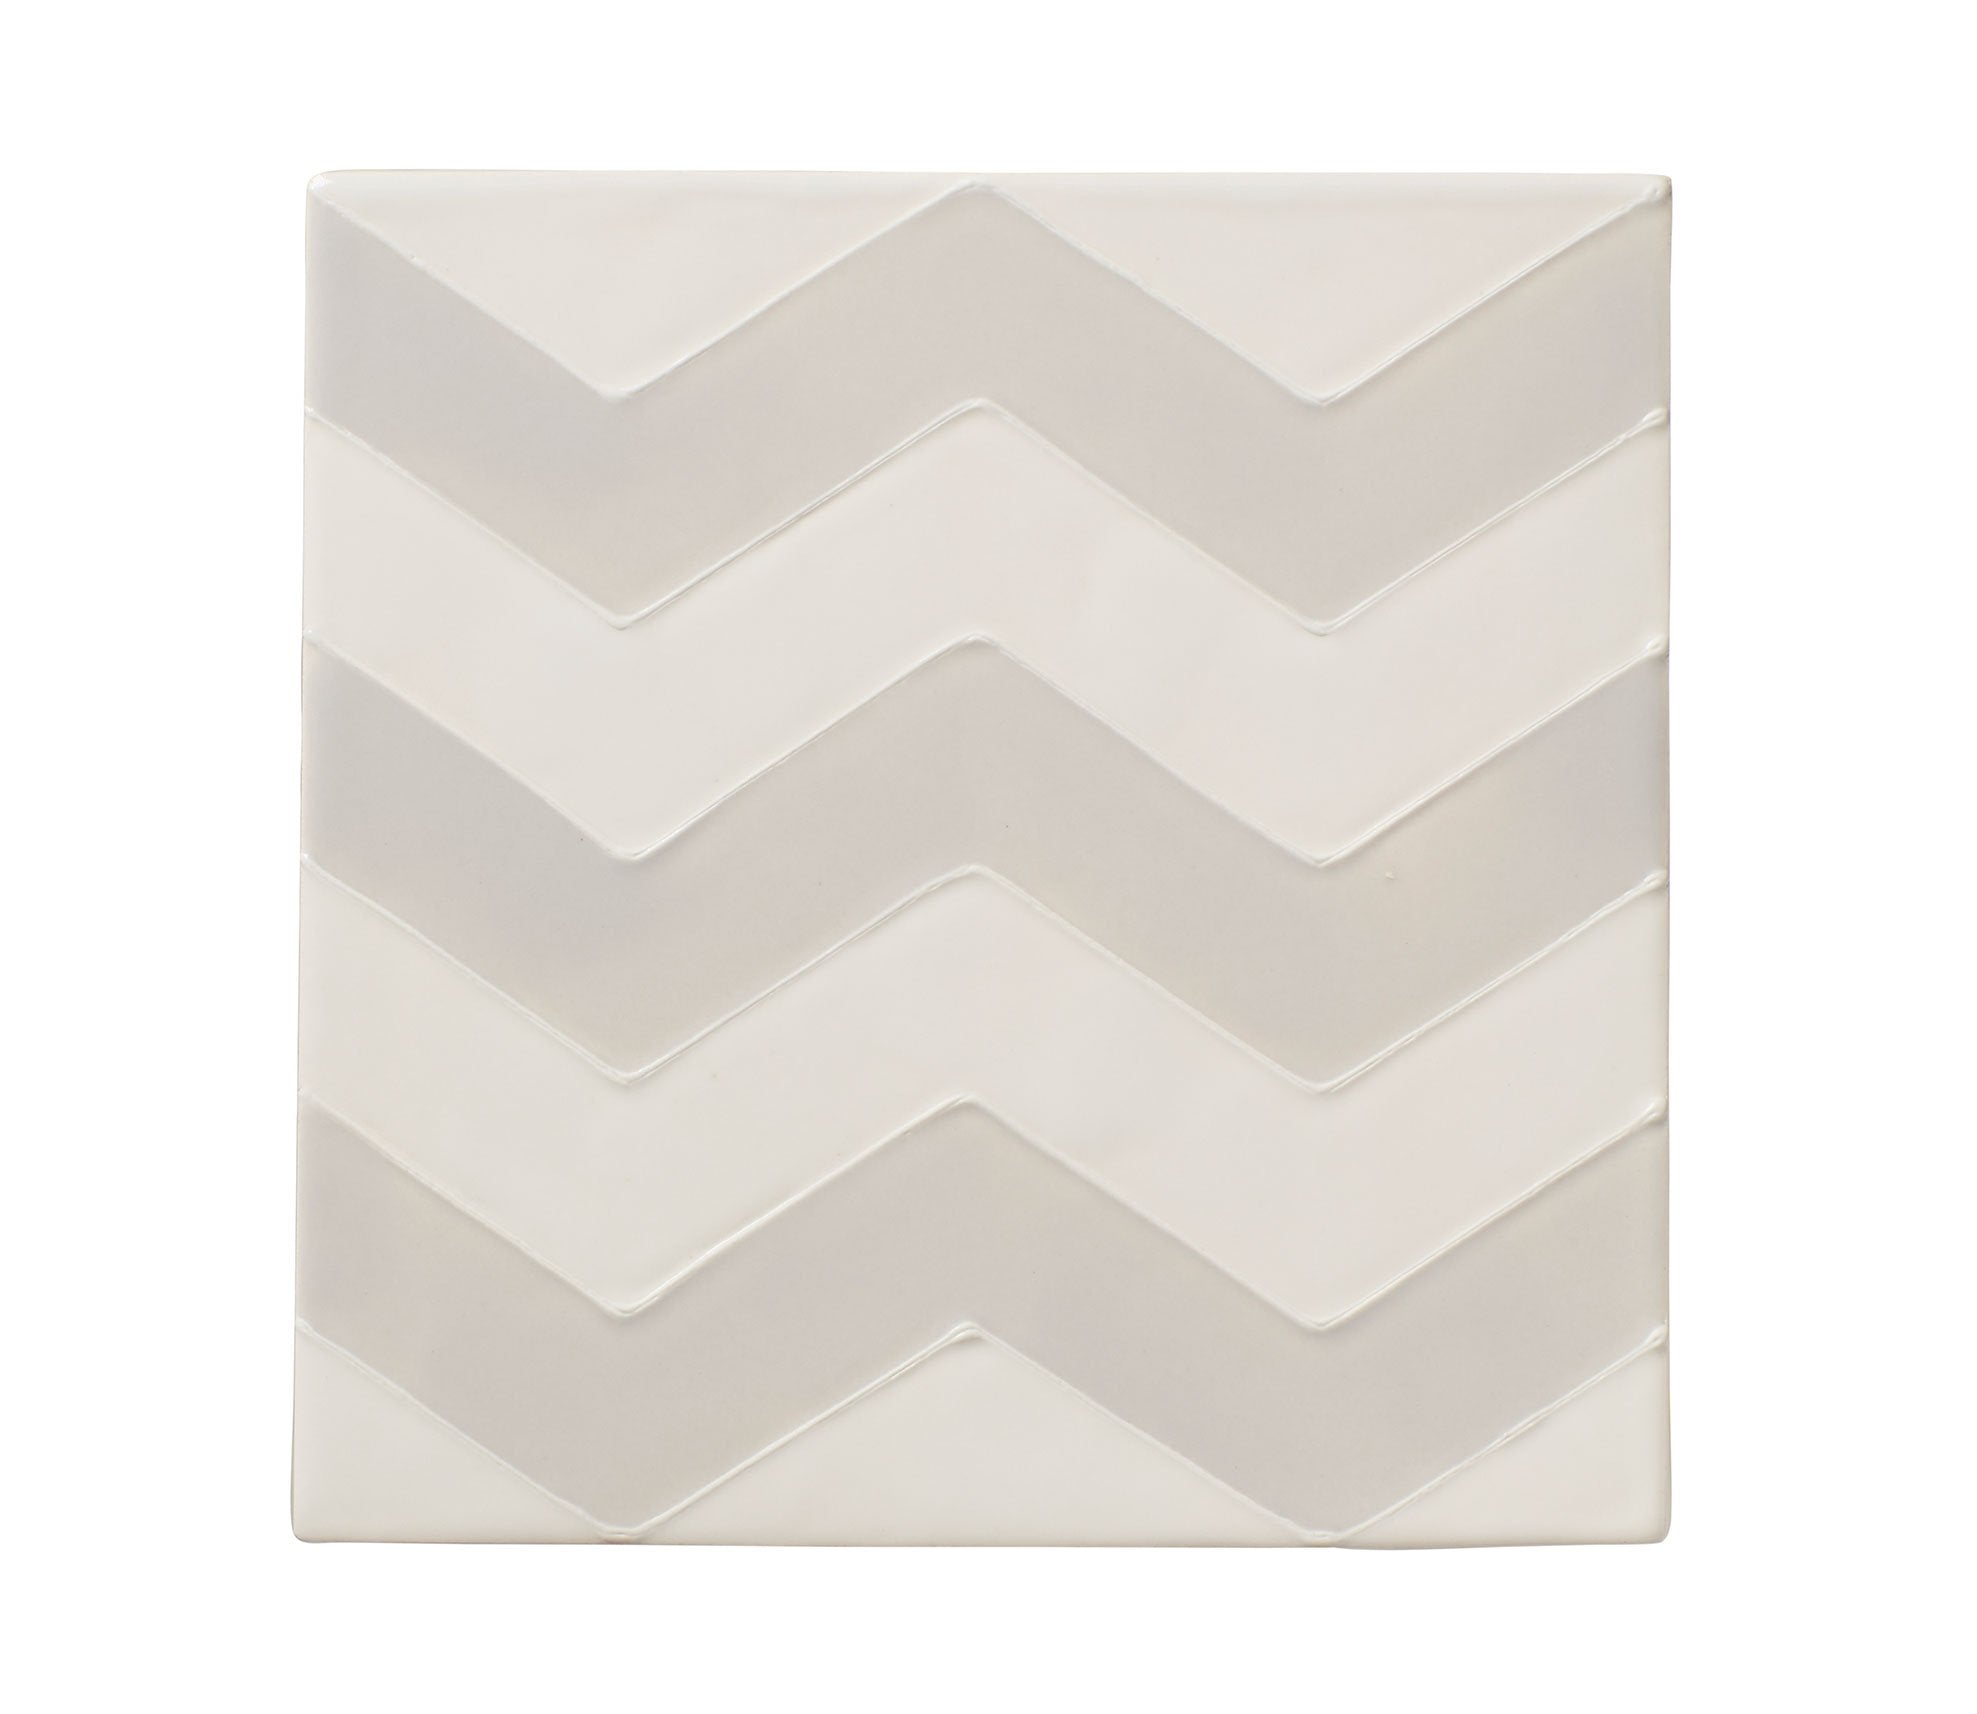 Hanley Tube Lined Decorative Tiles Product Image 18